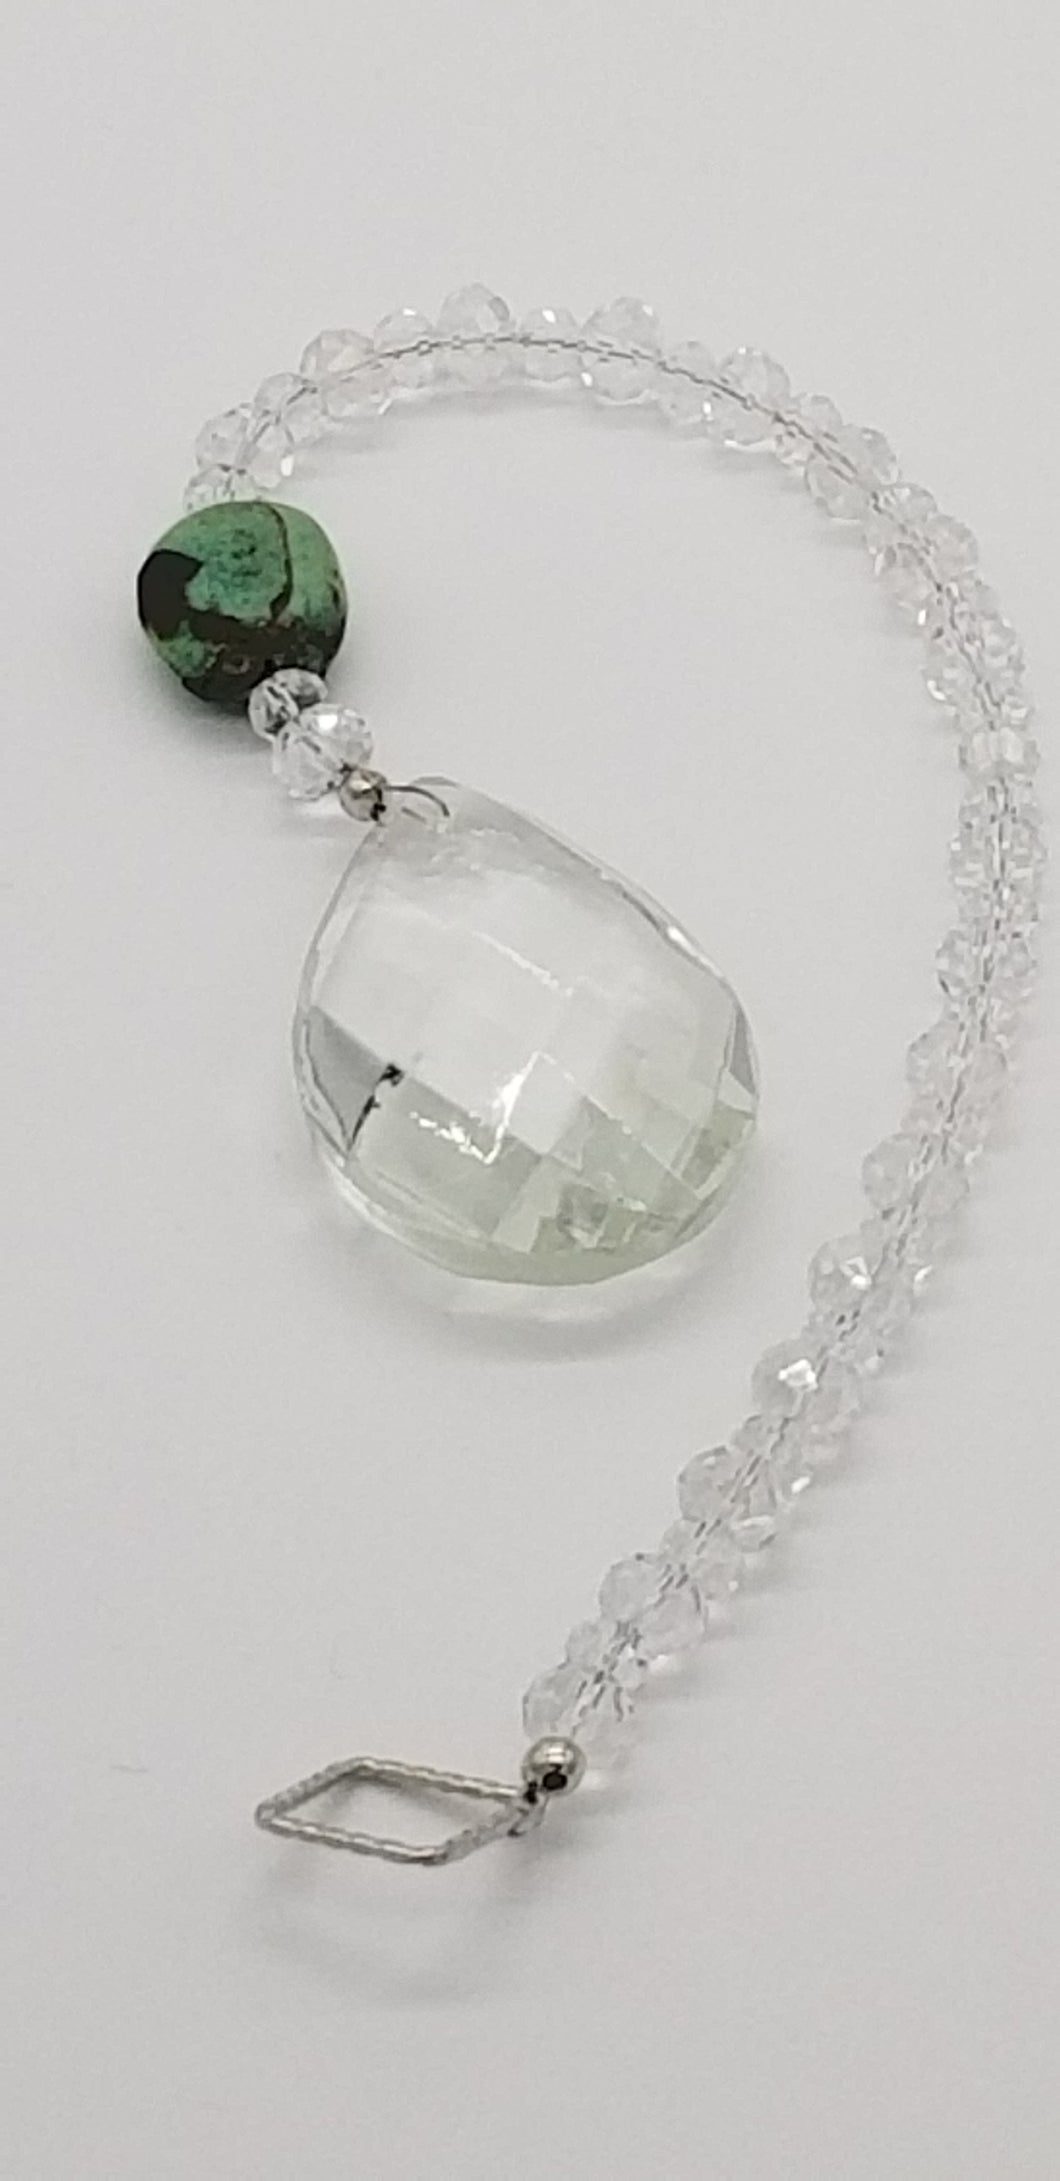 Crystal with Green Stone Suncatcher